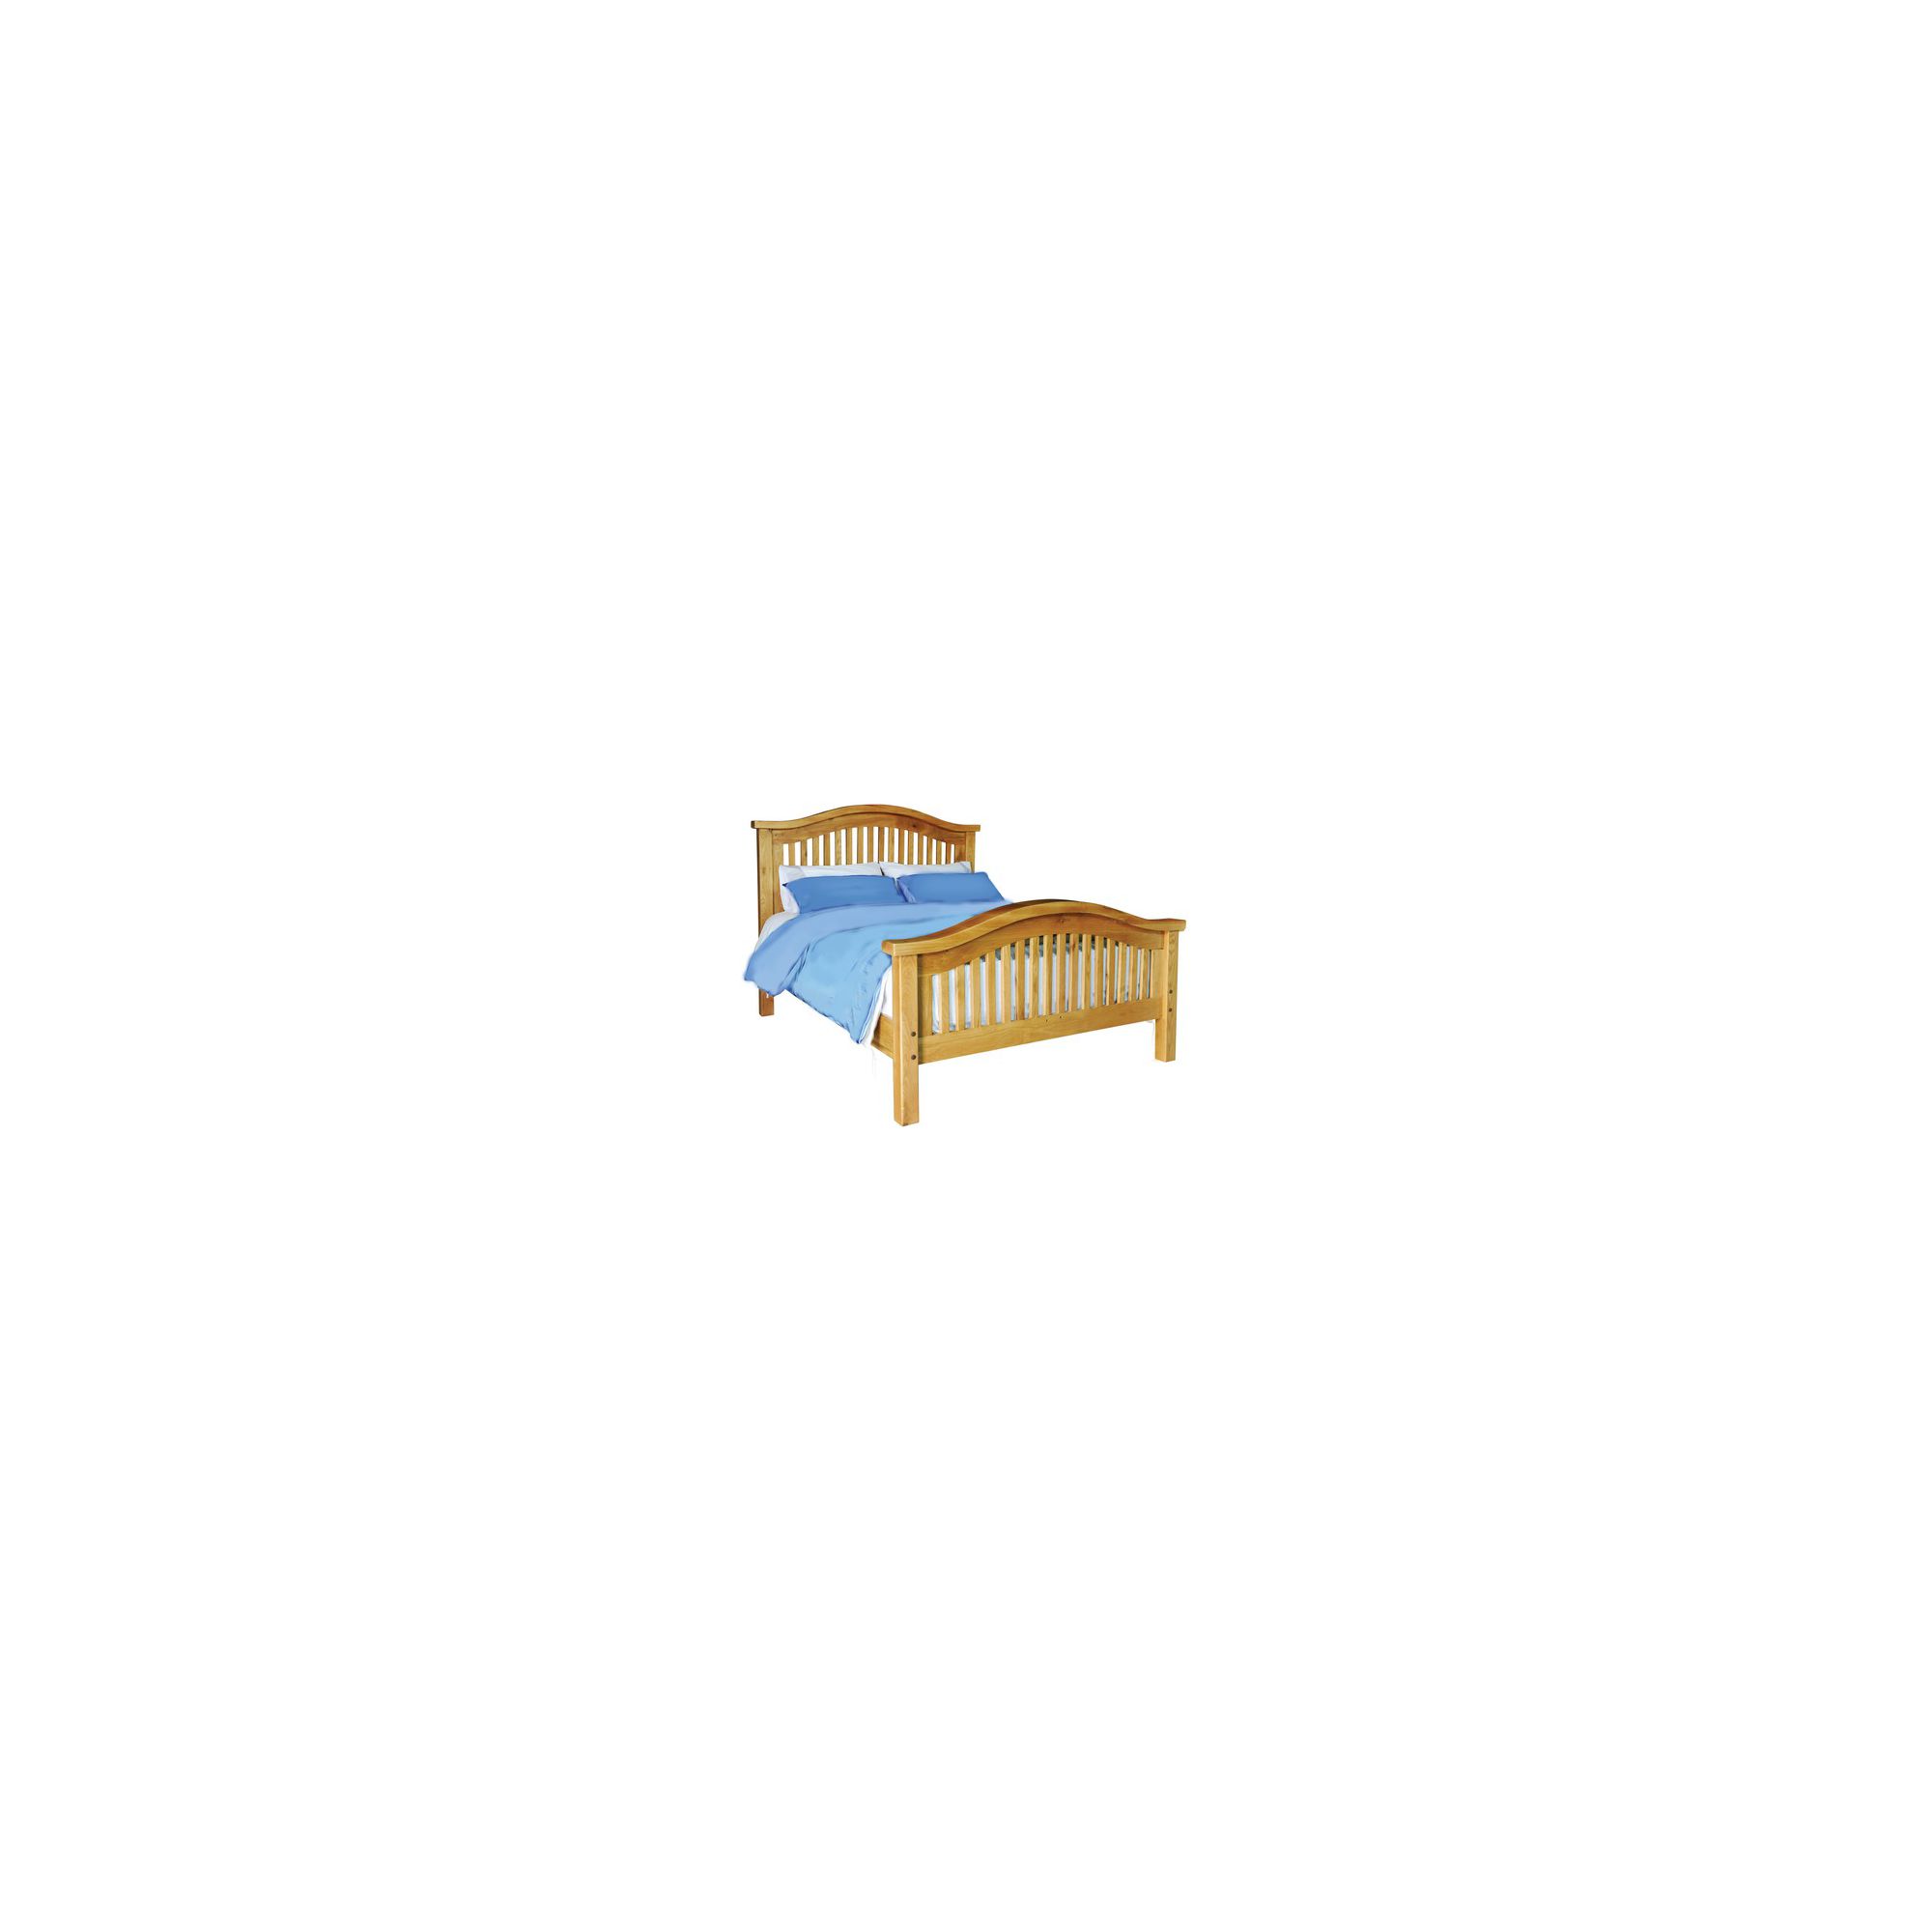 Hawkshead Calgary Curved Bed Frame - Double at Tesco Direct